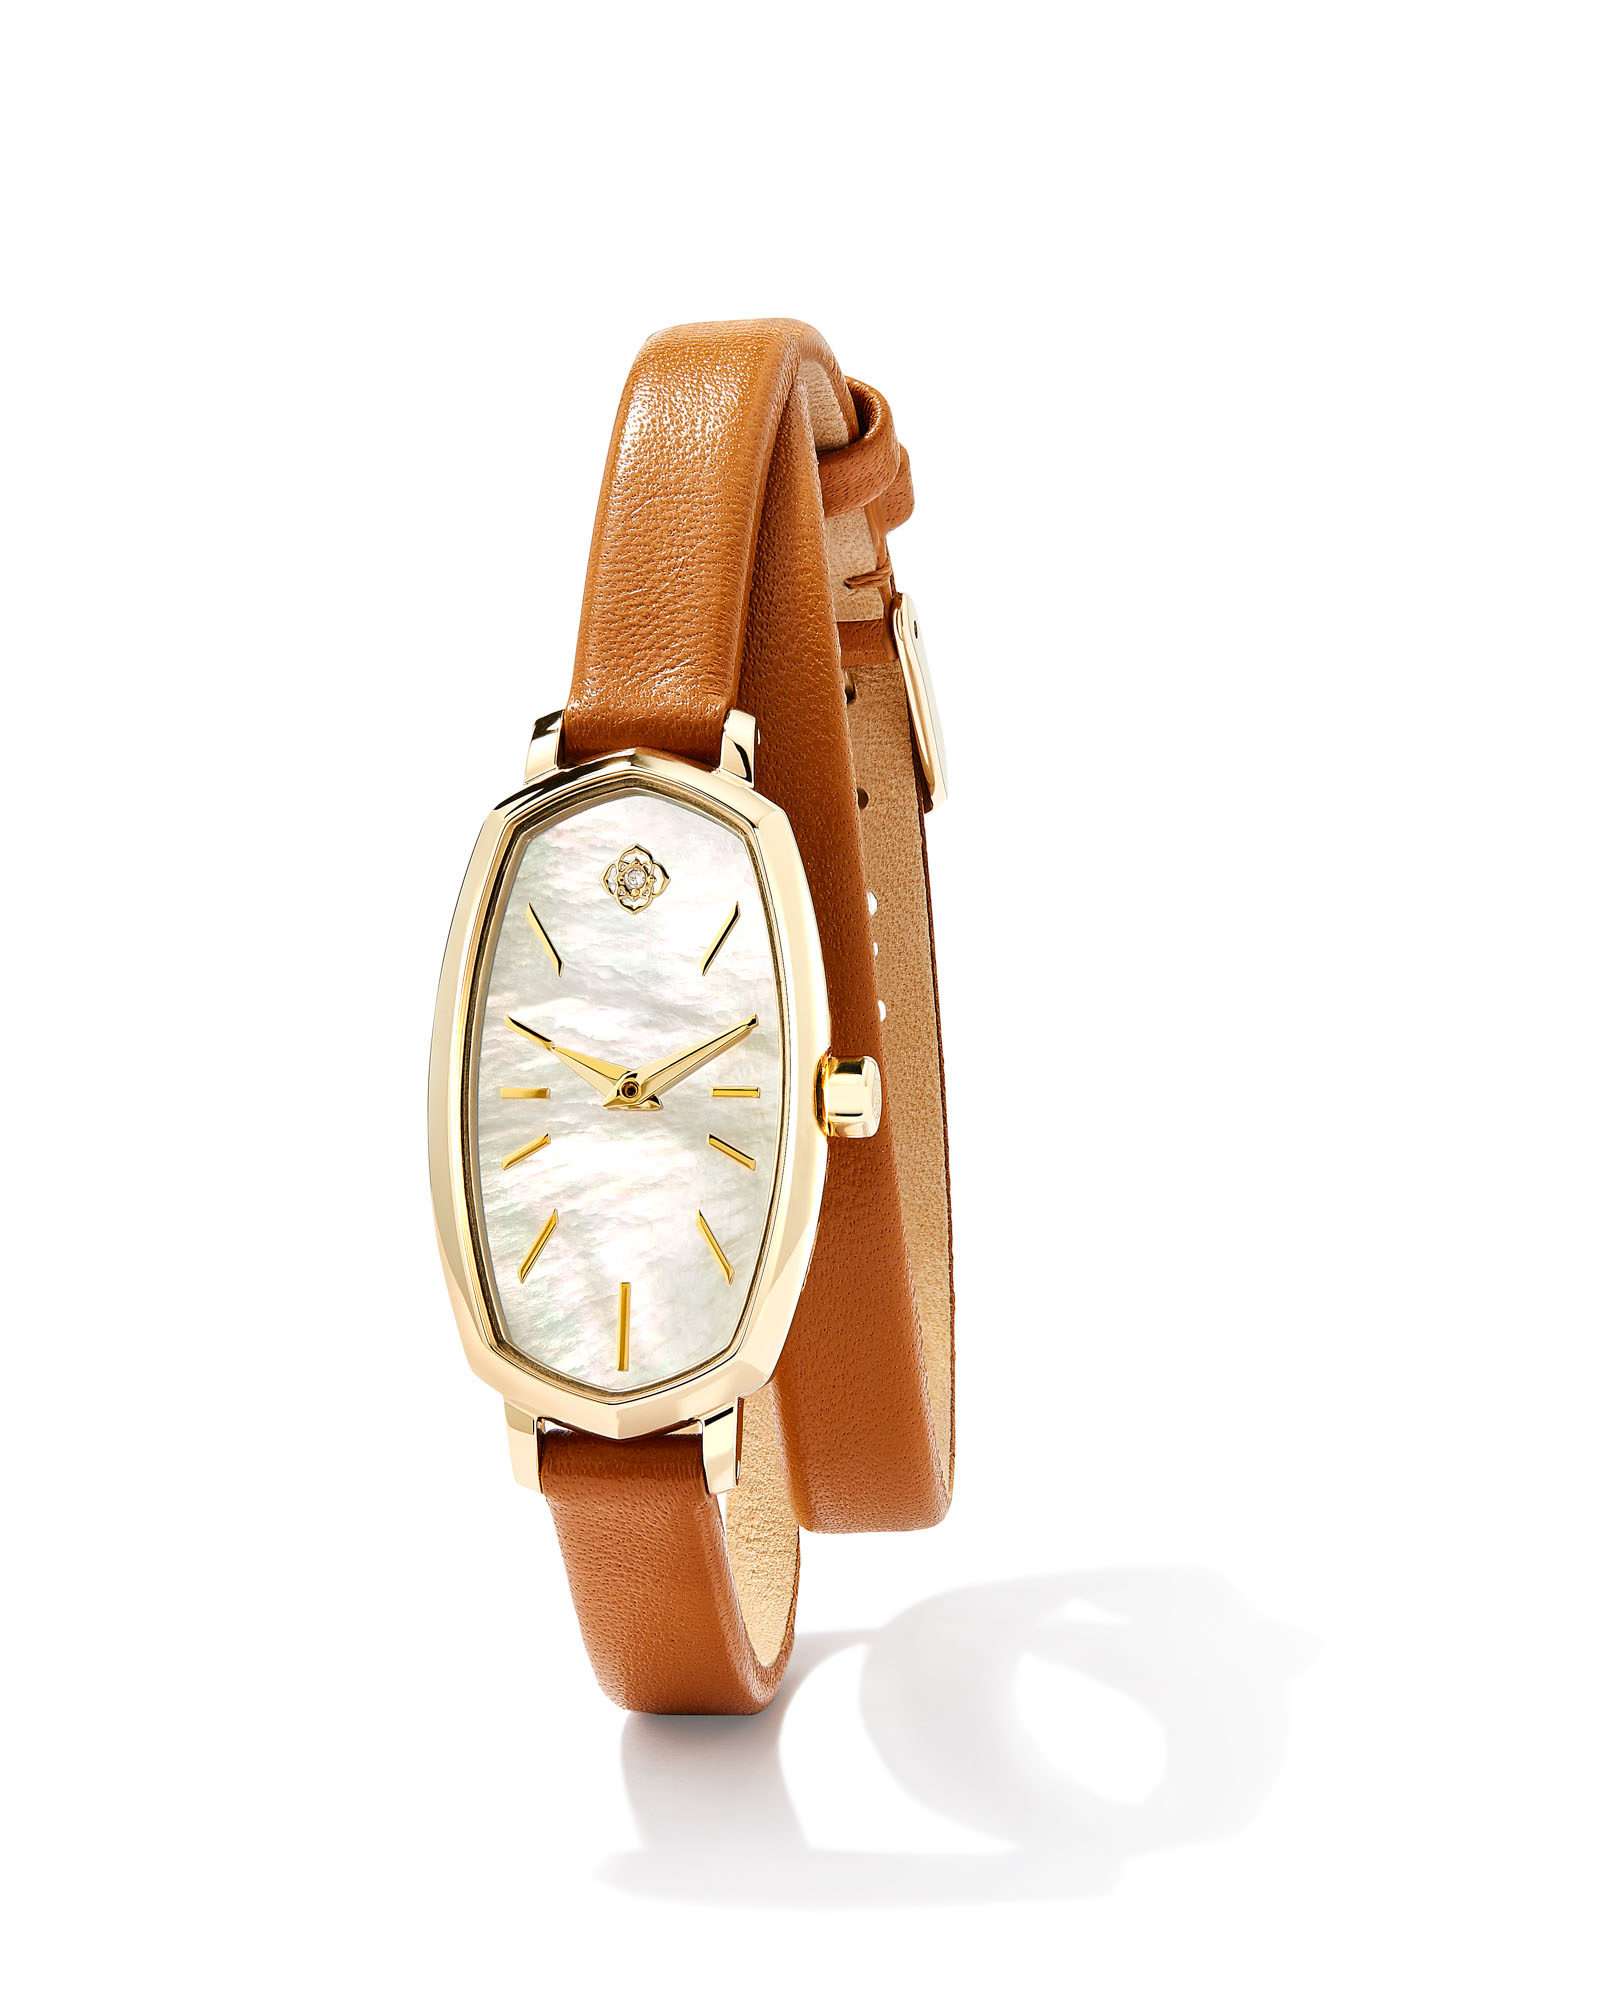 Elle Gold Tone Stainless Steel Leather Wrap Watch in Ivory Mother-Of-Pearl